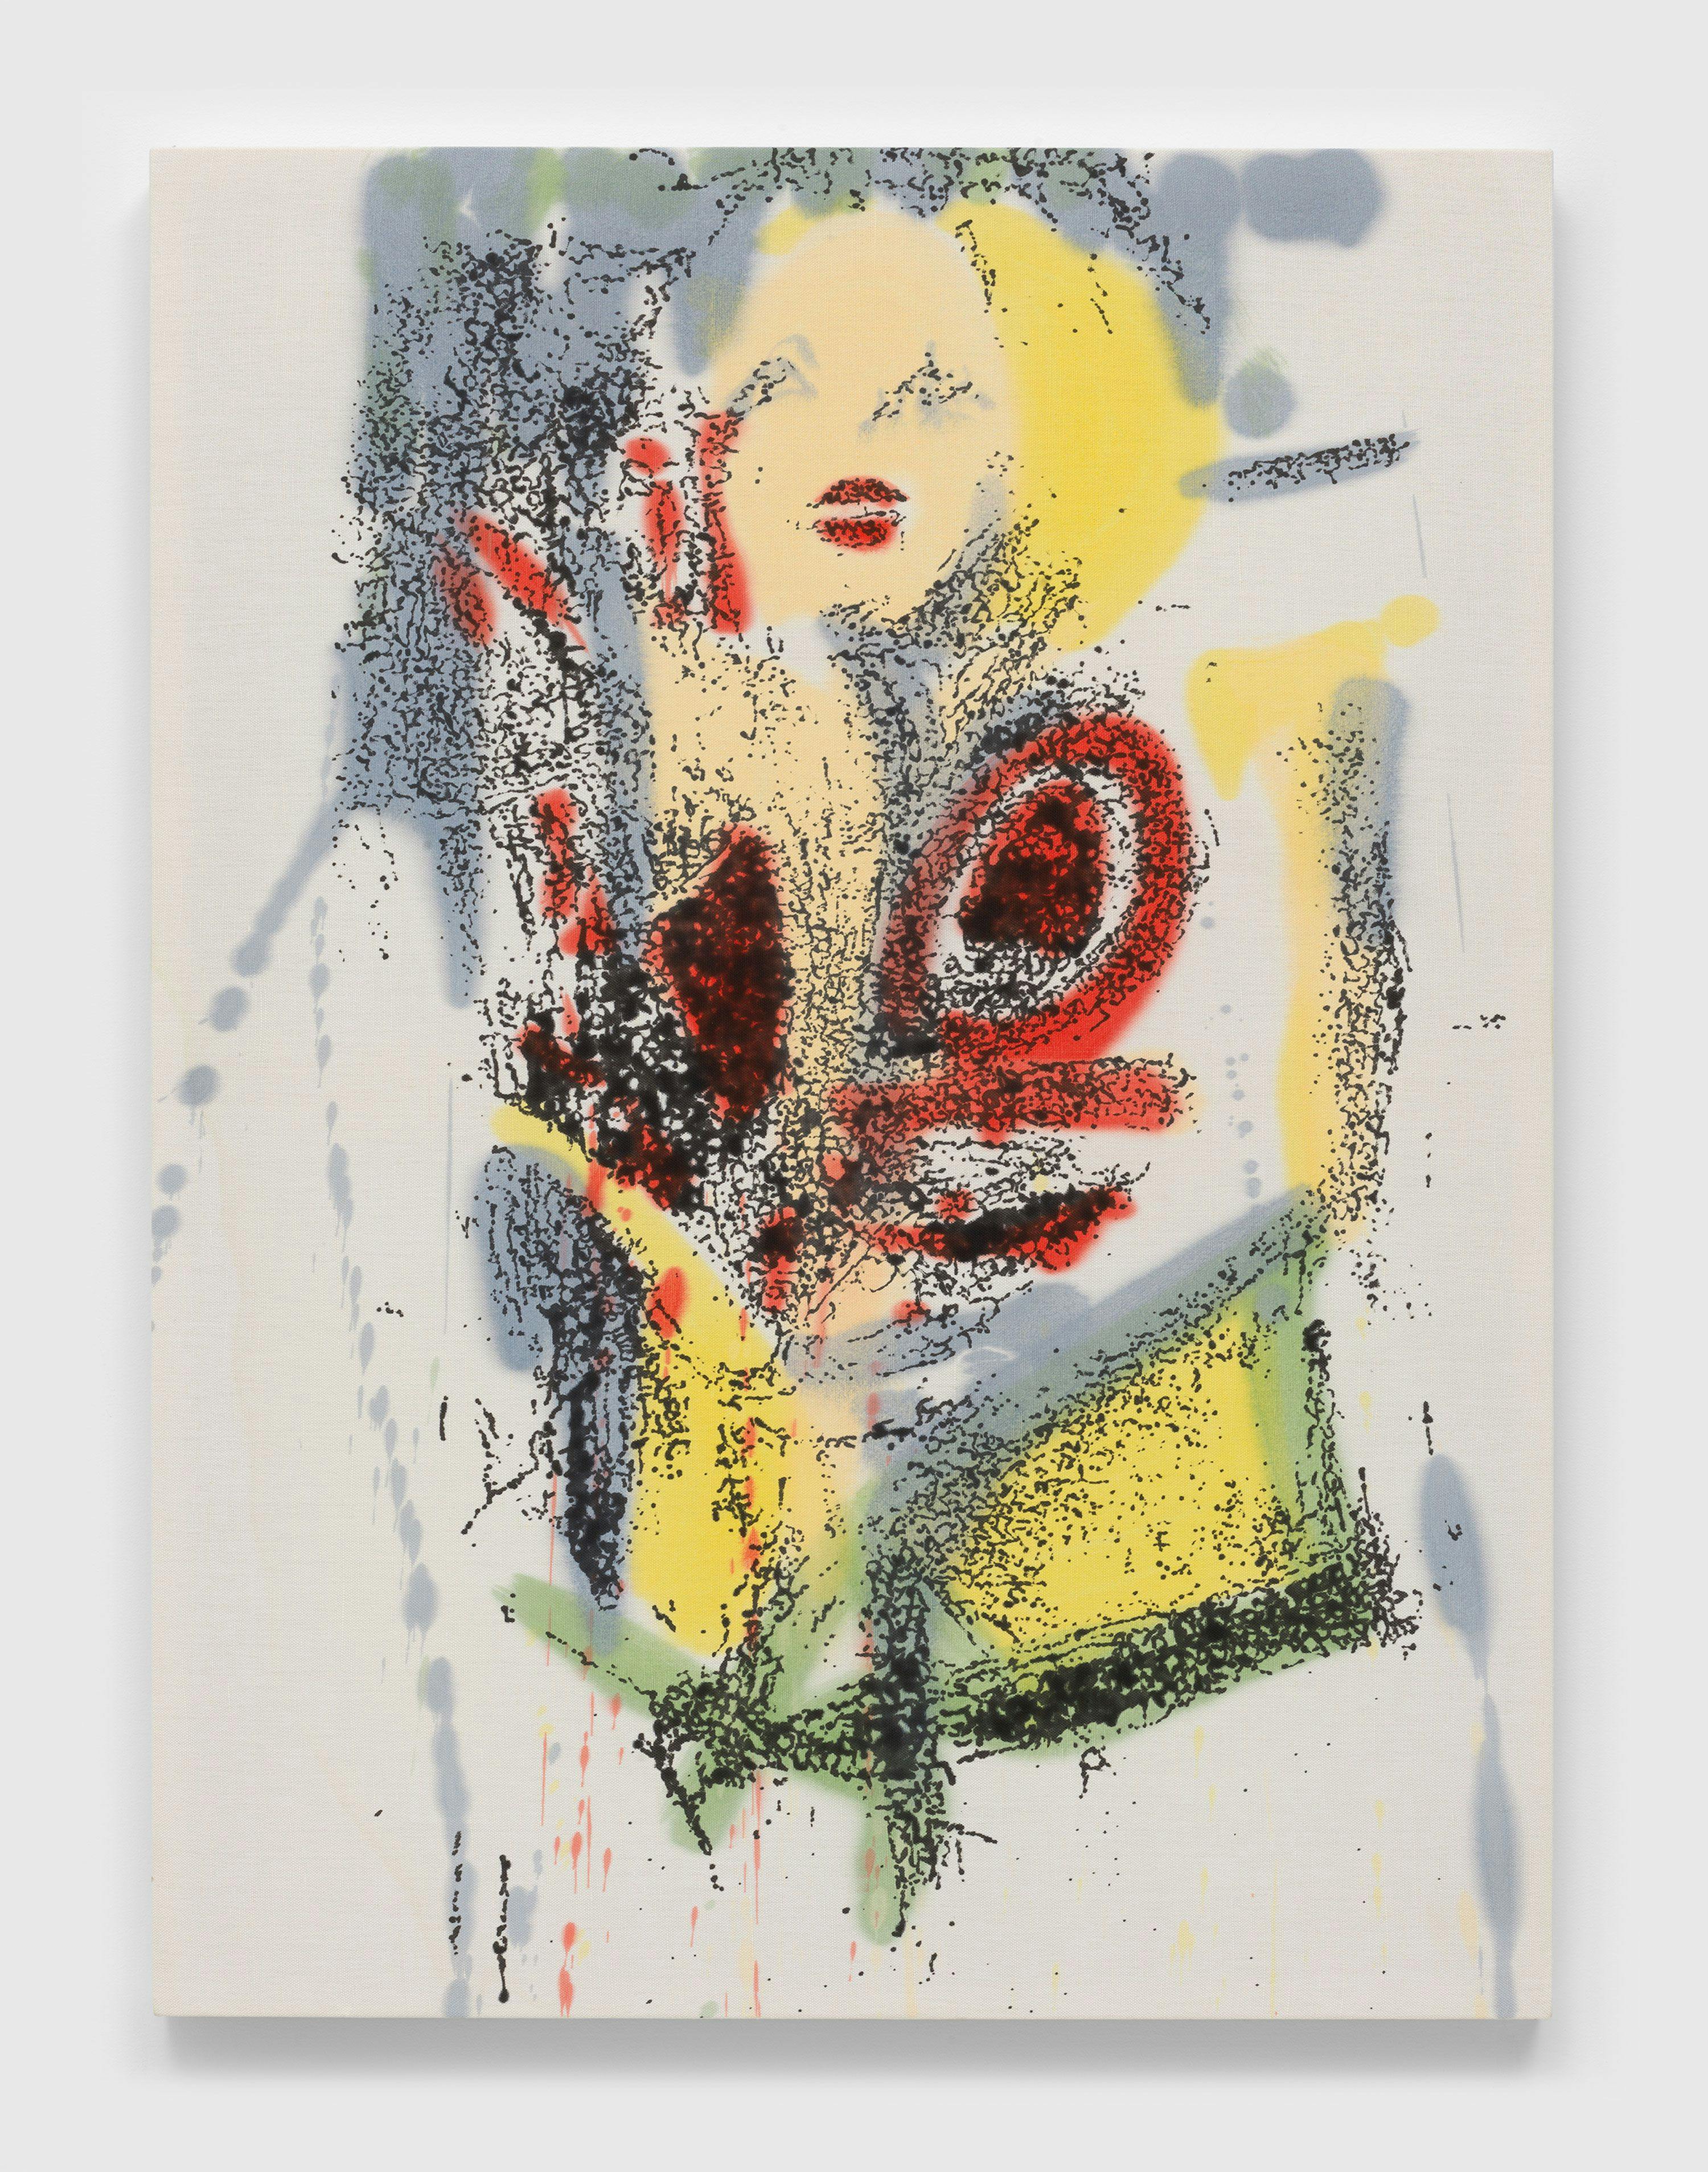 An oil and alkyd on linen artwork by Nate Lowman, titled That Marilyn, dated 2012.